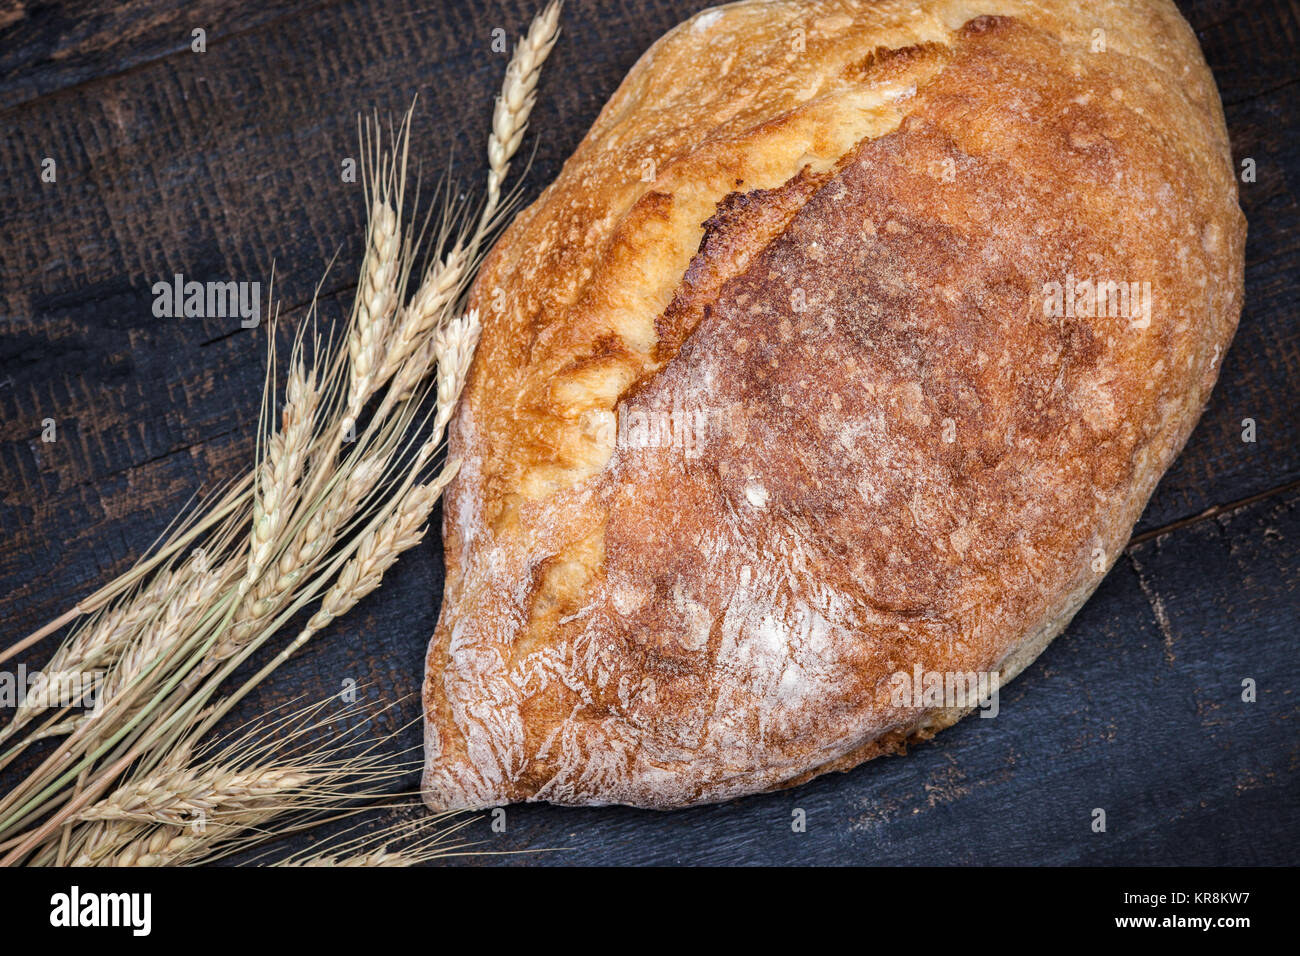 Rustic bread on wood table. Dark moody background with free text space. Stock Photo